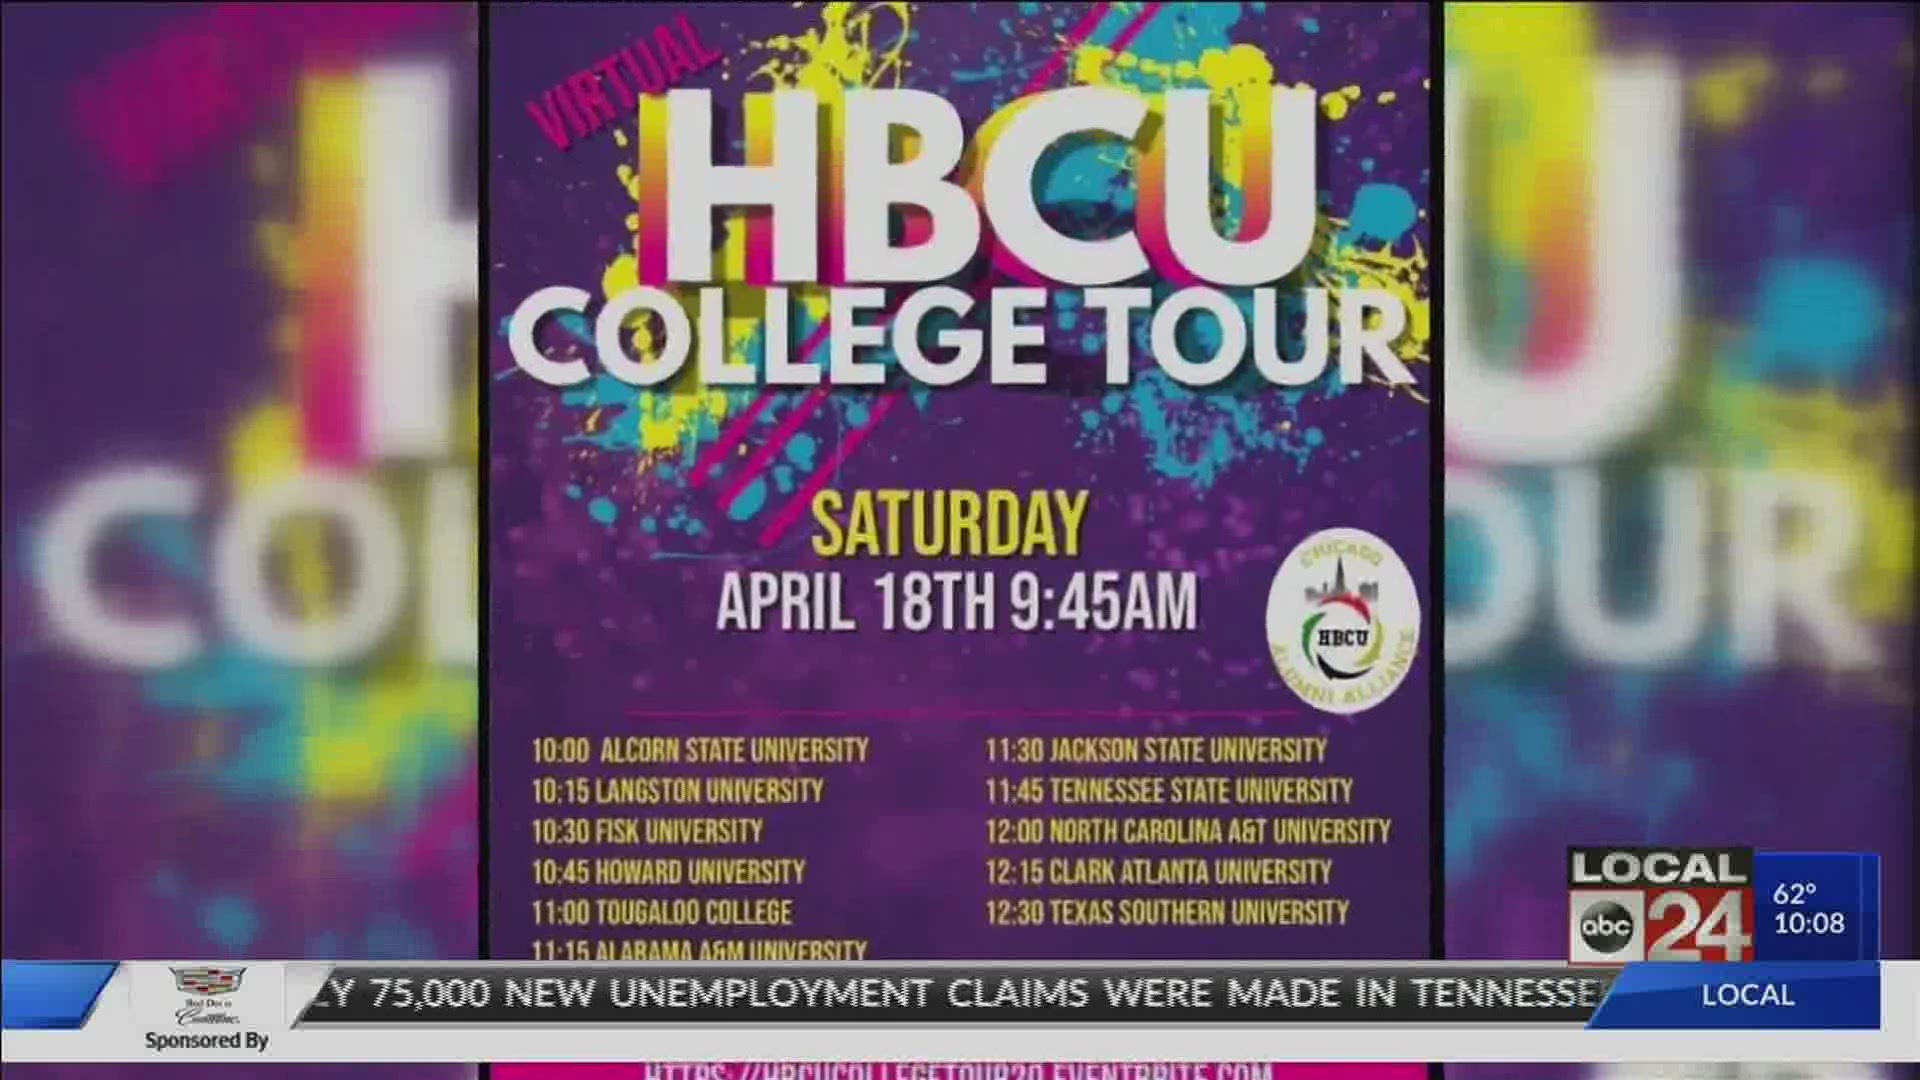 Students and parents have opportunity to learn more about historically black colleges and universities April 18